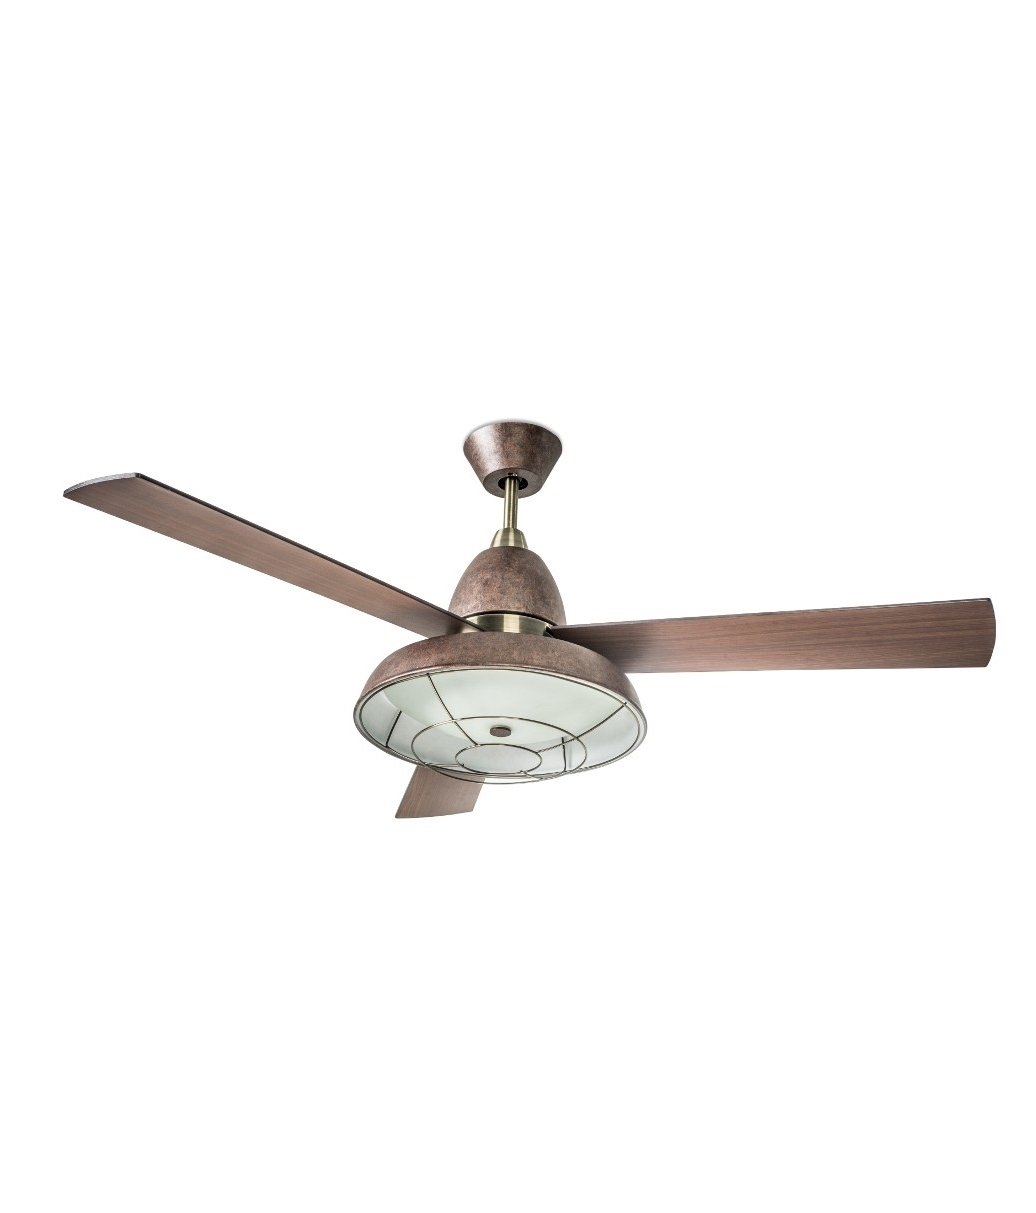 Retro Ceiling Fan With Caged Light Remote Control 3 Reversible Blades - Vintage Ceiling Fan With Light And Remote